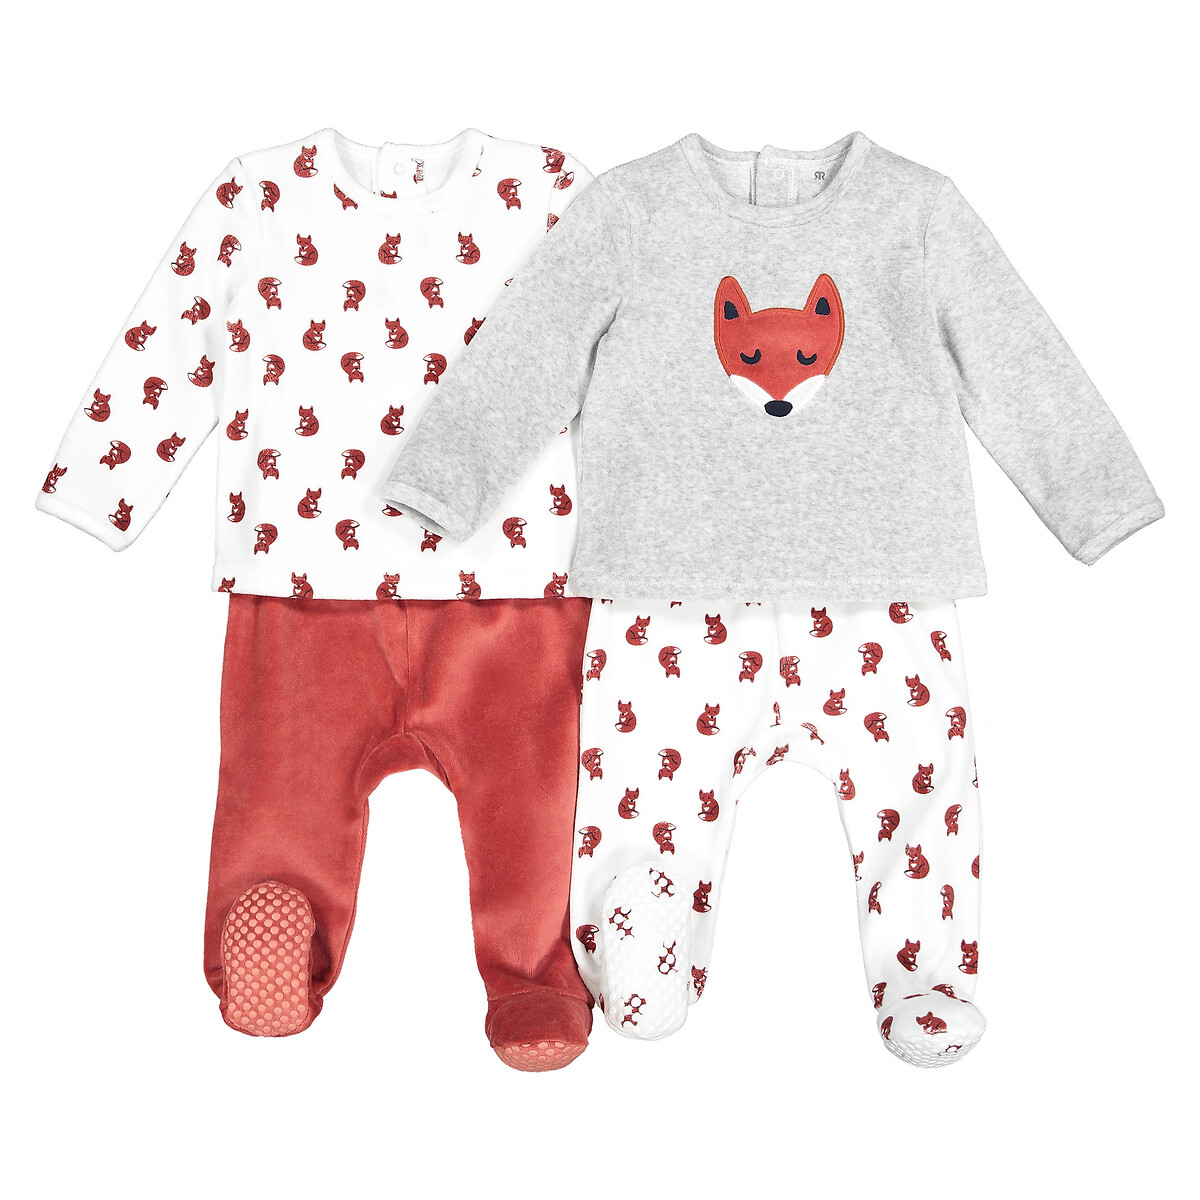 Pack Of 2 Velour Pyjamas In Cotton Mix 1 Month 4 Years Ecru Brown La Redoute Collections La Redoute